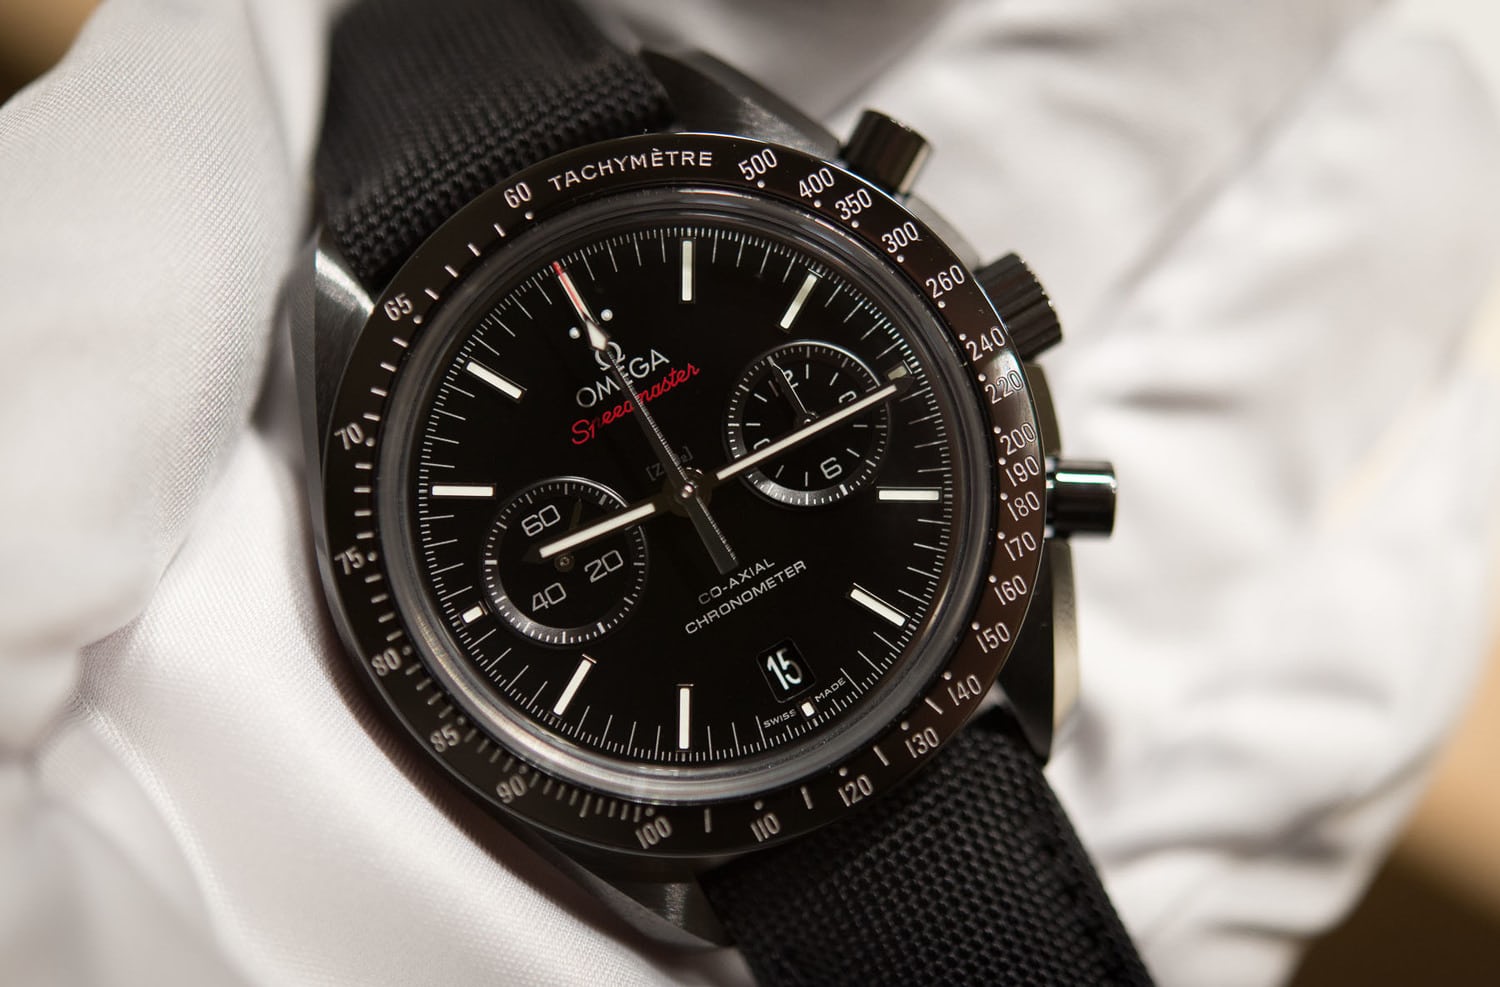 Thoughts On The Omega Speedmaster Dark Side Of The Moon: Just